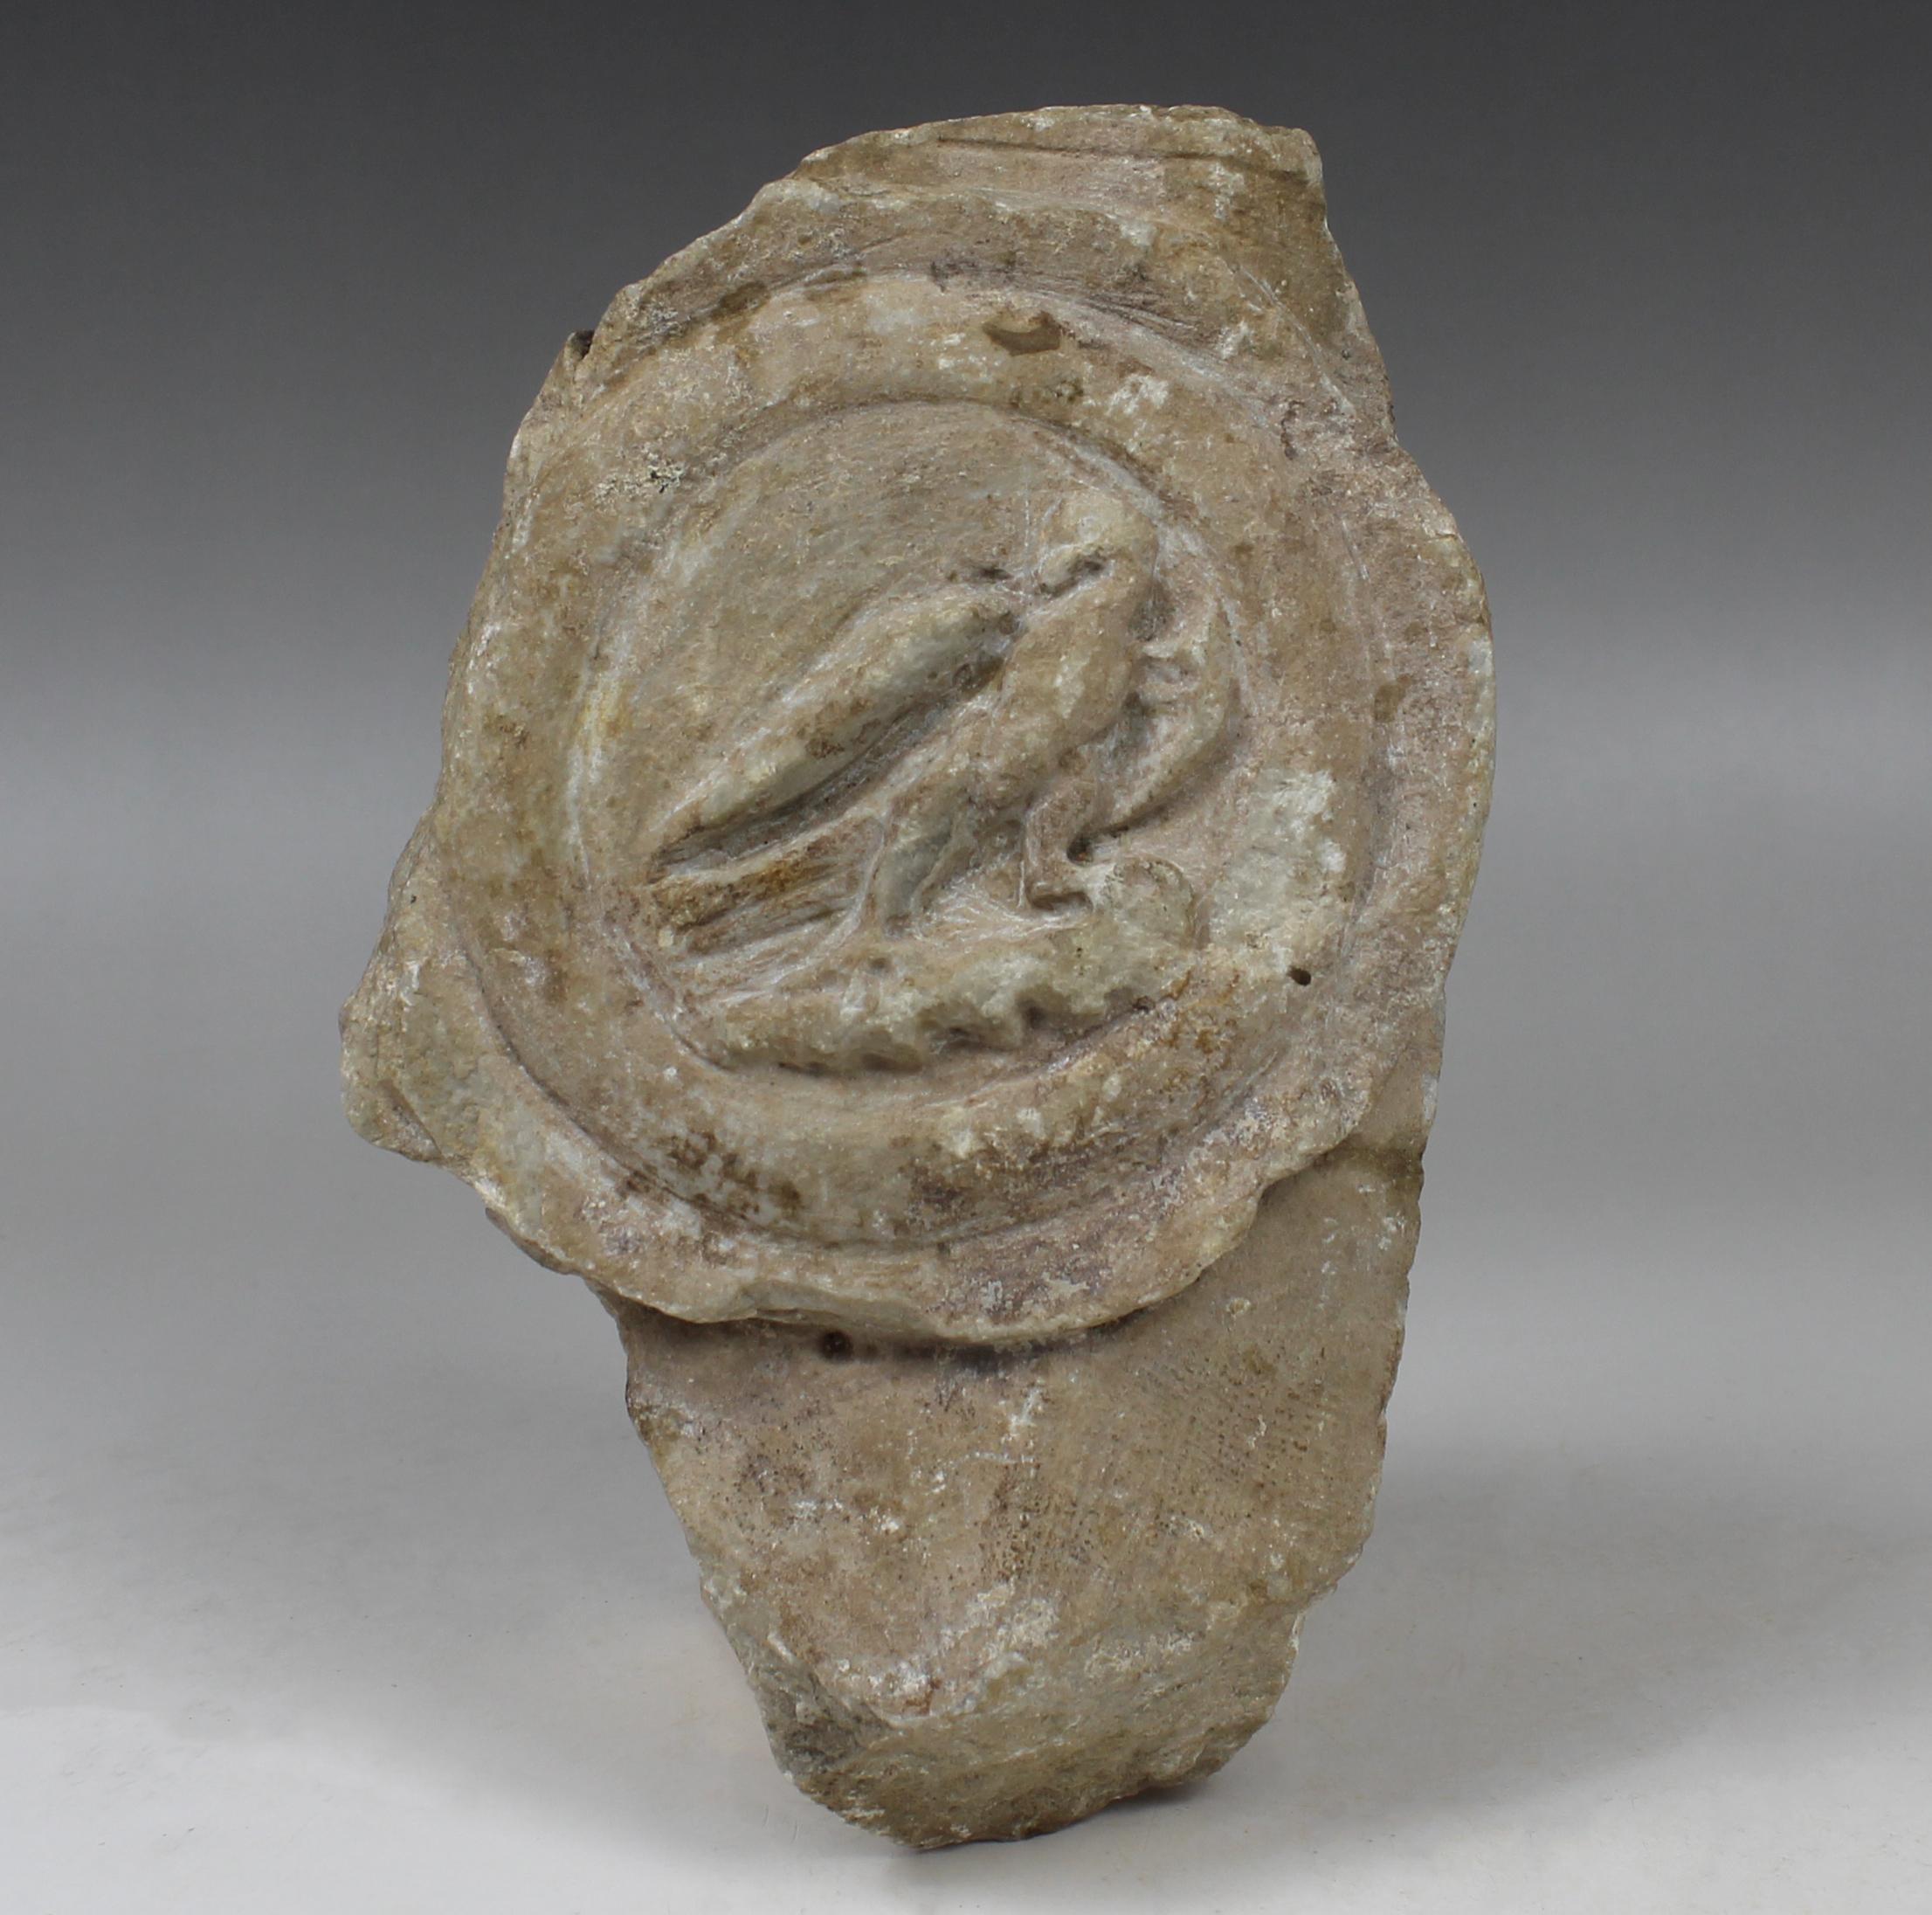 ITEM: Lorica thoracata depicting a medallion with eagle, fragment
MATERIAL: Marble
CULTURE: Roman, Smyrna
PERIOD: 1st – 2nd Century A.D
DIMENSIONS: 175 mm x 115 mm x 52 mm
CONDITION: Good condition
PROVENANCE: Ex Paul Gaudin collection, Paris 1858 –